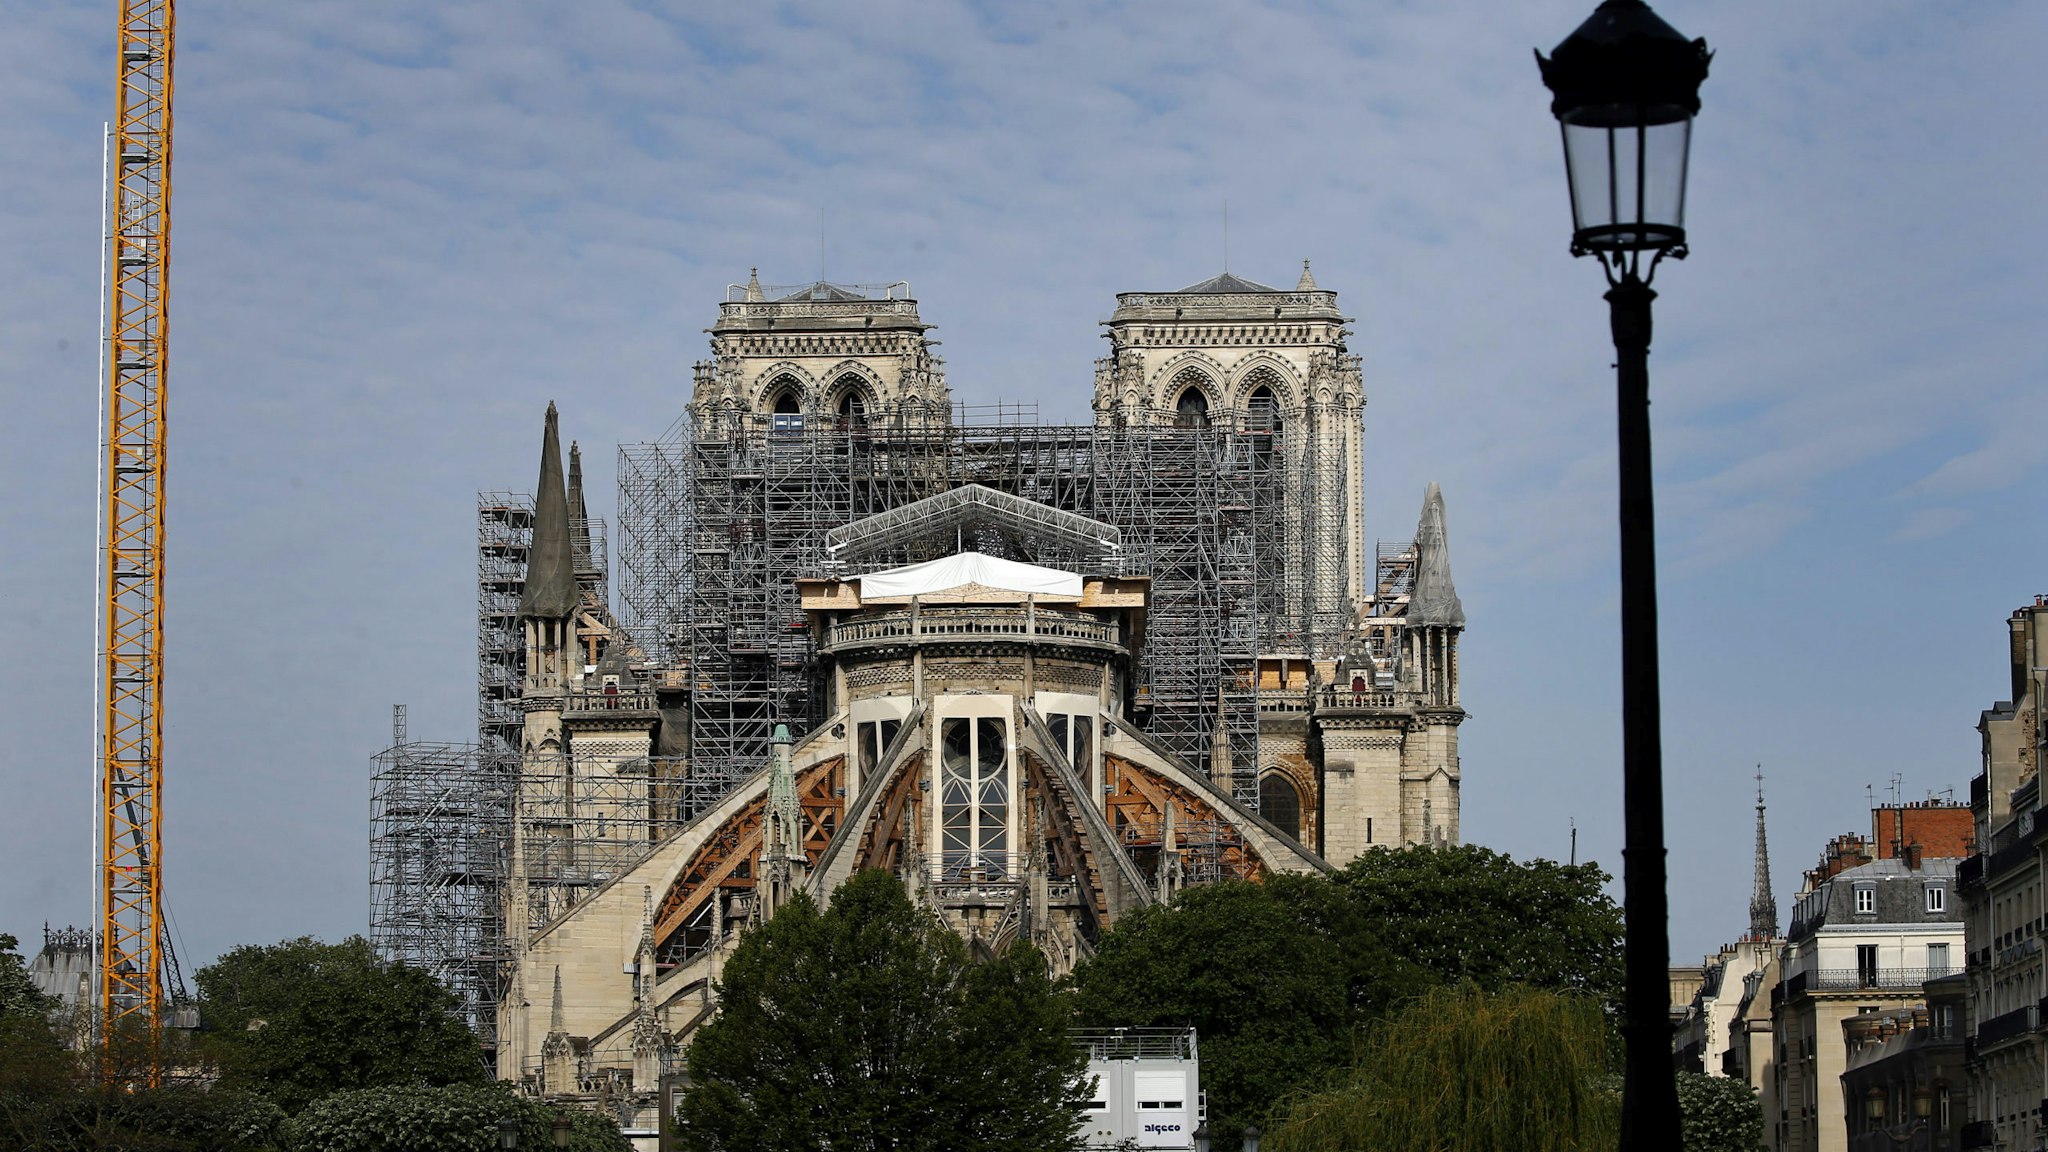 PARIS, FRANCE - APRIL 27: Notre-Dame de Paris Cathedral is seen one year after fire ravaged the emblematic monument on April 27, 2020 in Paris, France. Restoration work resumes slowly after an interruption due to the coronavirus lockdown. The coronavirus (COVID-19) pandemic has spread to many countries across the world, claiming over 206,000 lives and infecting over 2.9 million people. (Photo by Chesnot/Getty Images)